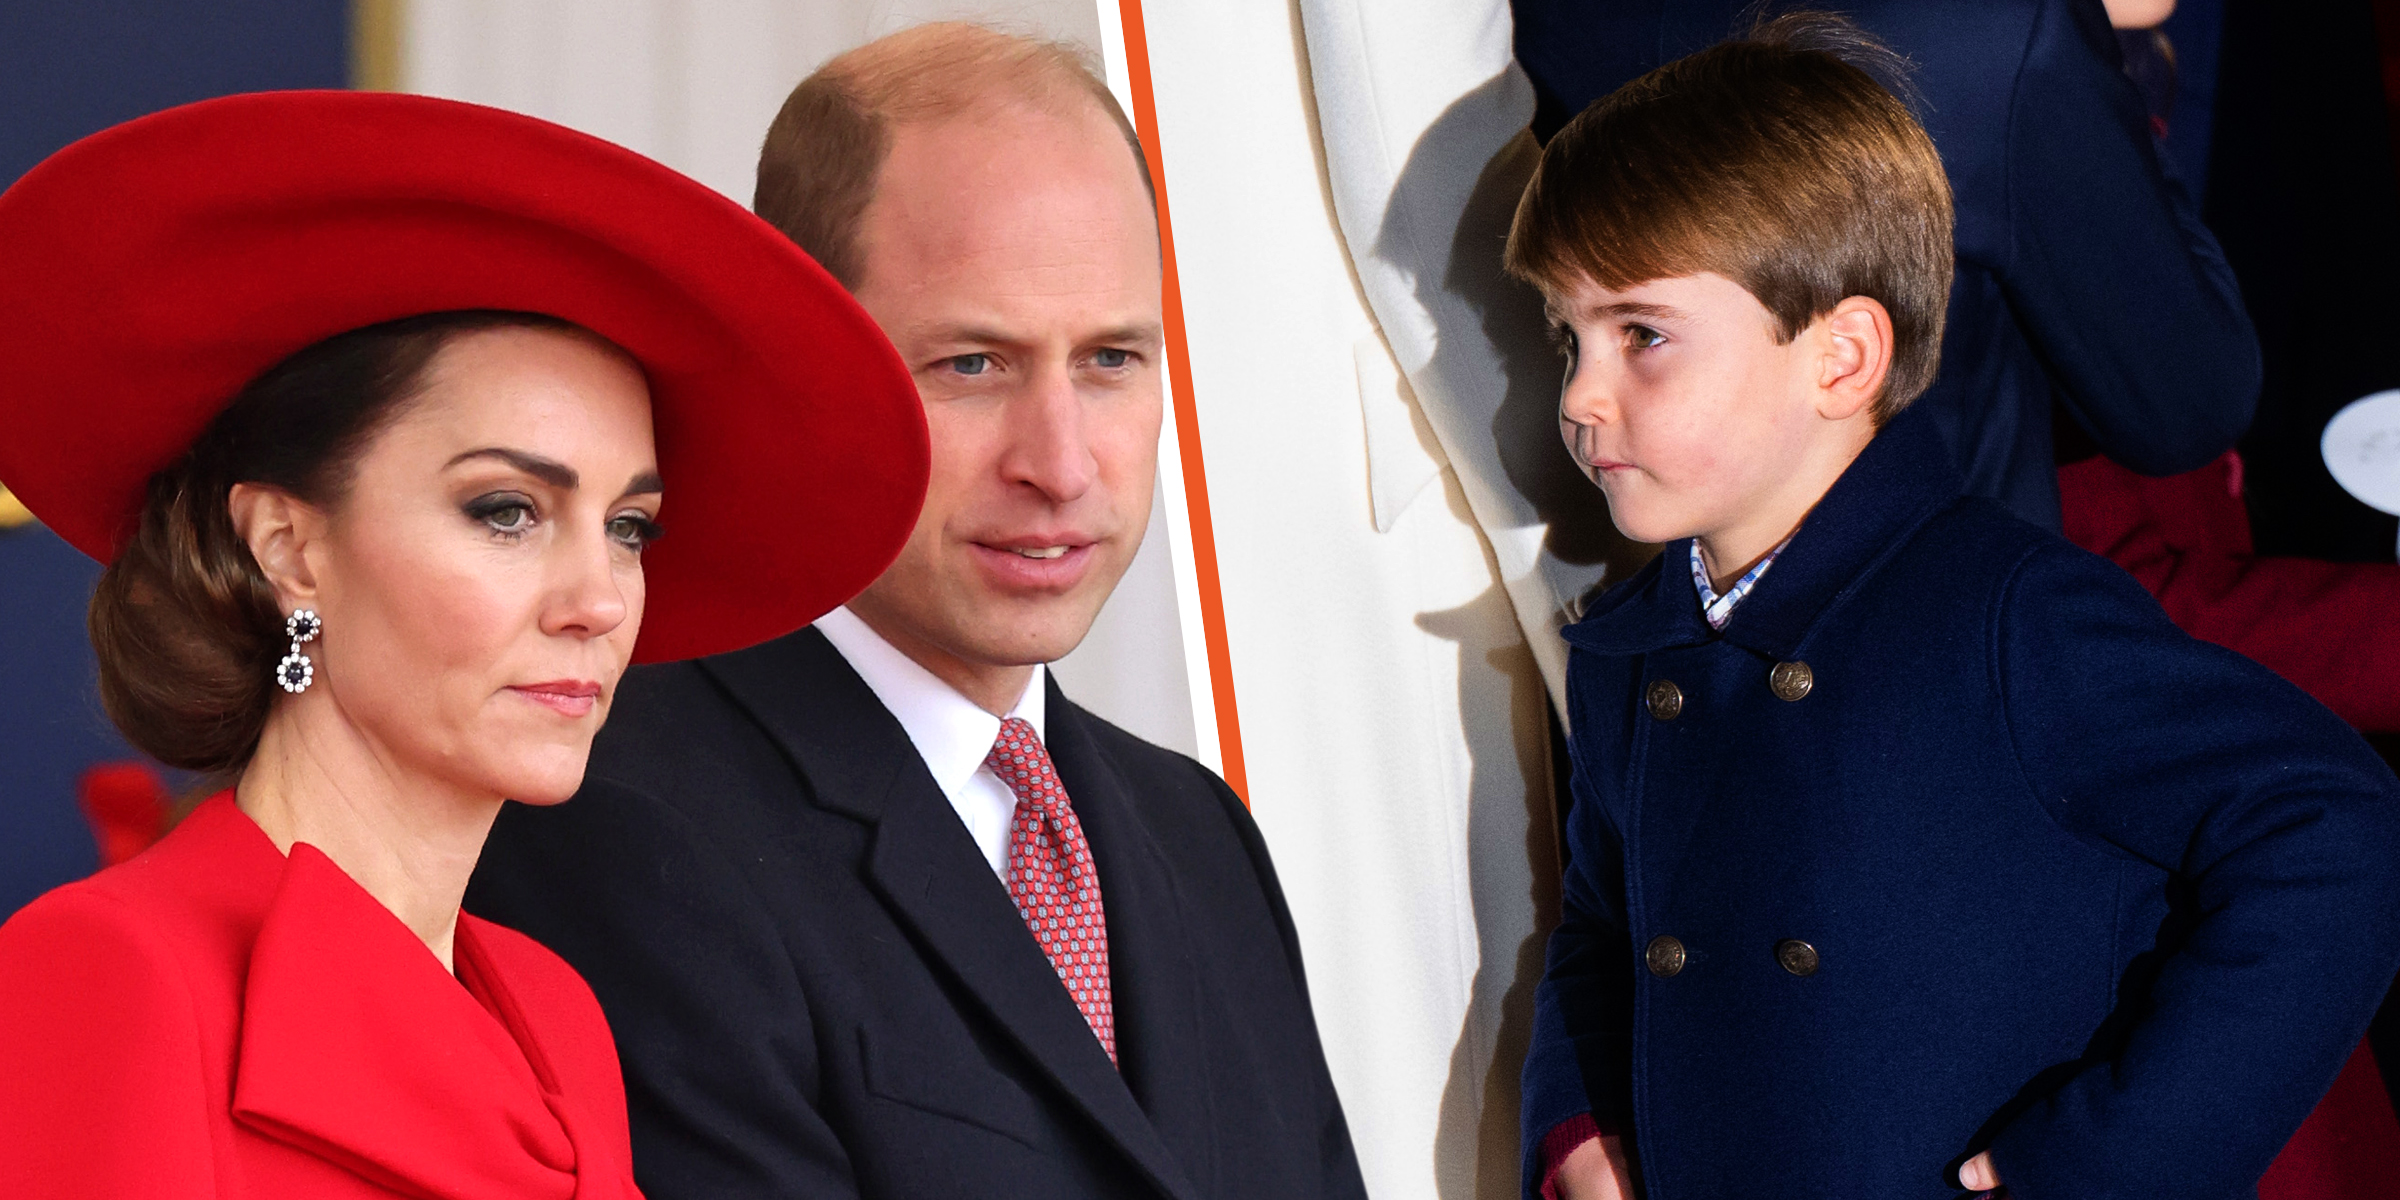 Princess Catherine, Princess of Wales, and Prince William, Prince of Wales | Prince Louis | Source: Getty Images